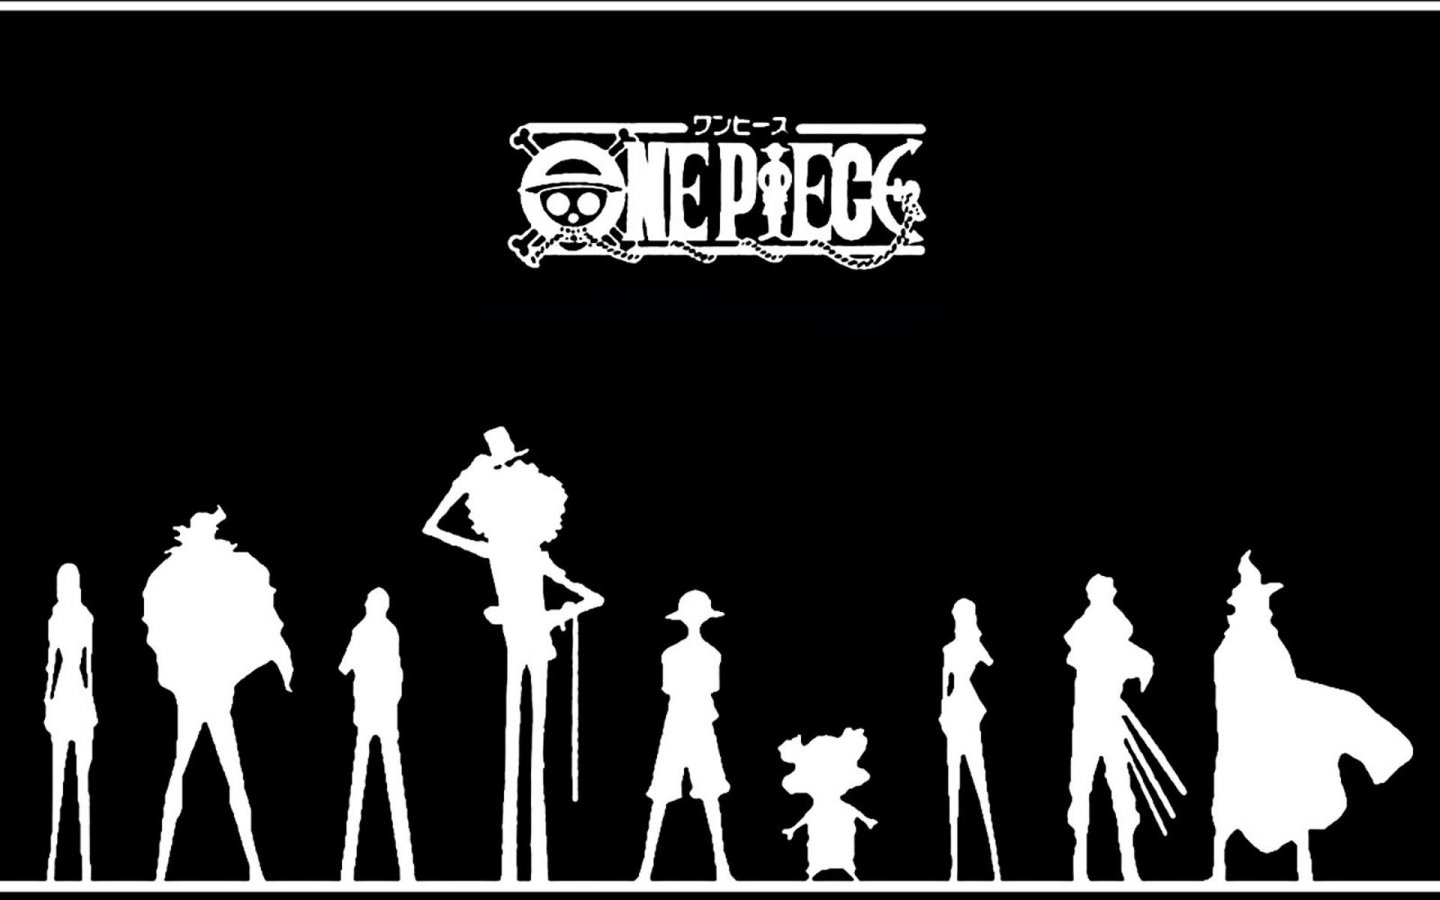 Black And White One Piece Image Wallpaper - One Piece , HD Wallpaper & Backgrounds